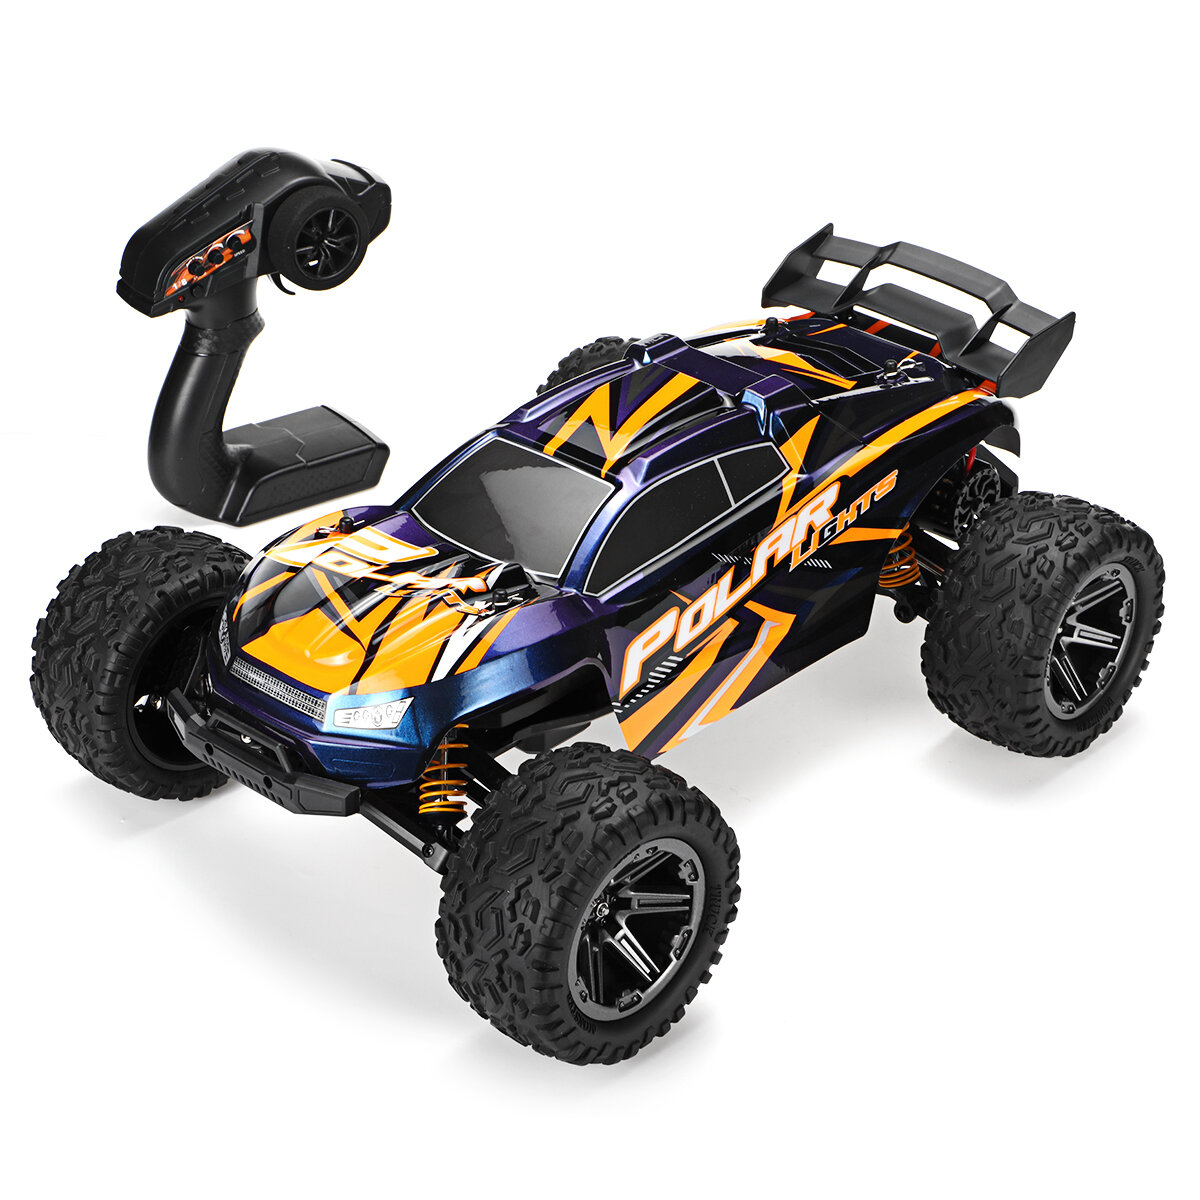 

HS 10425 1/8 RC Car 2.4G RWD Full Proportional Control Big Foot High Speed 45km/h Vehicle Models Truck RTR